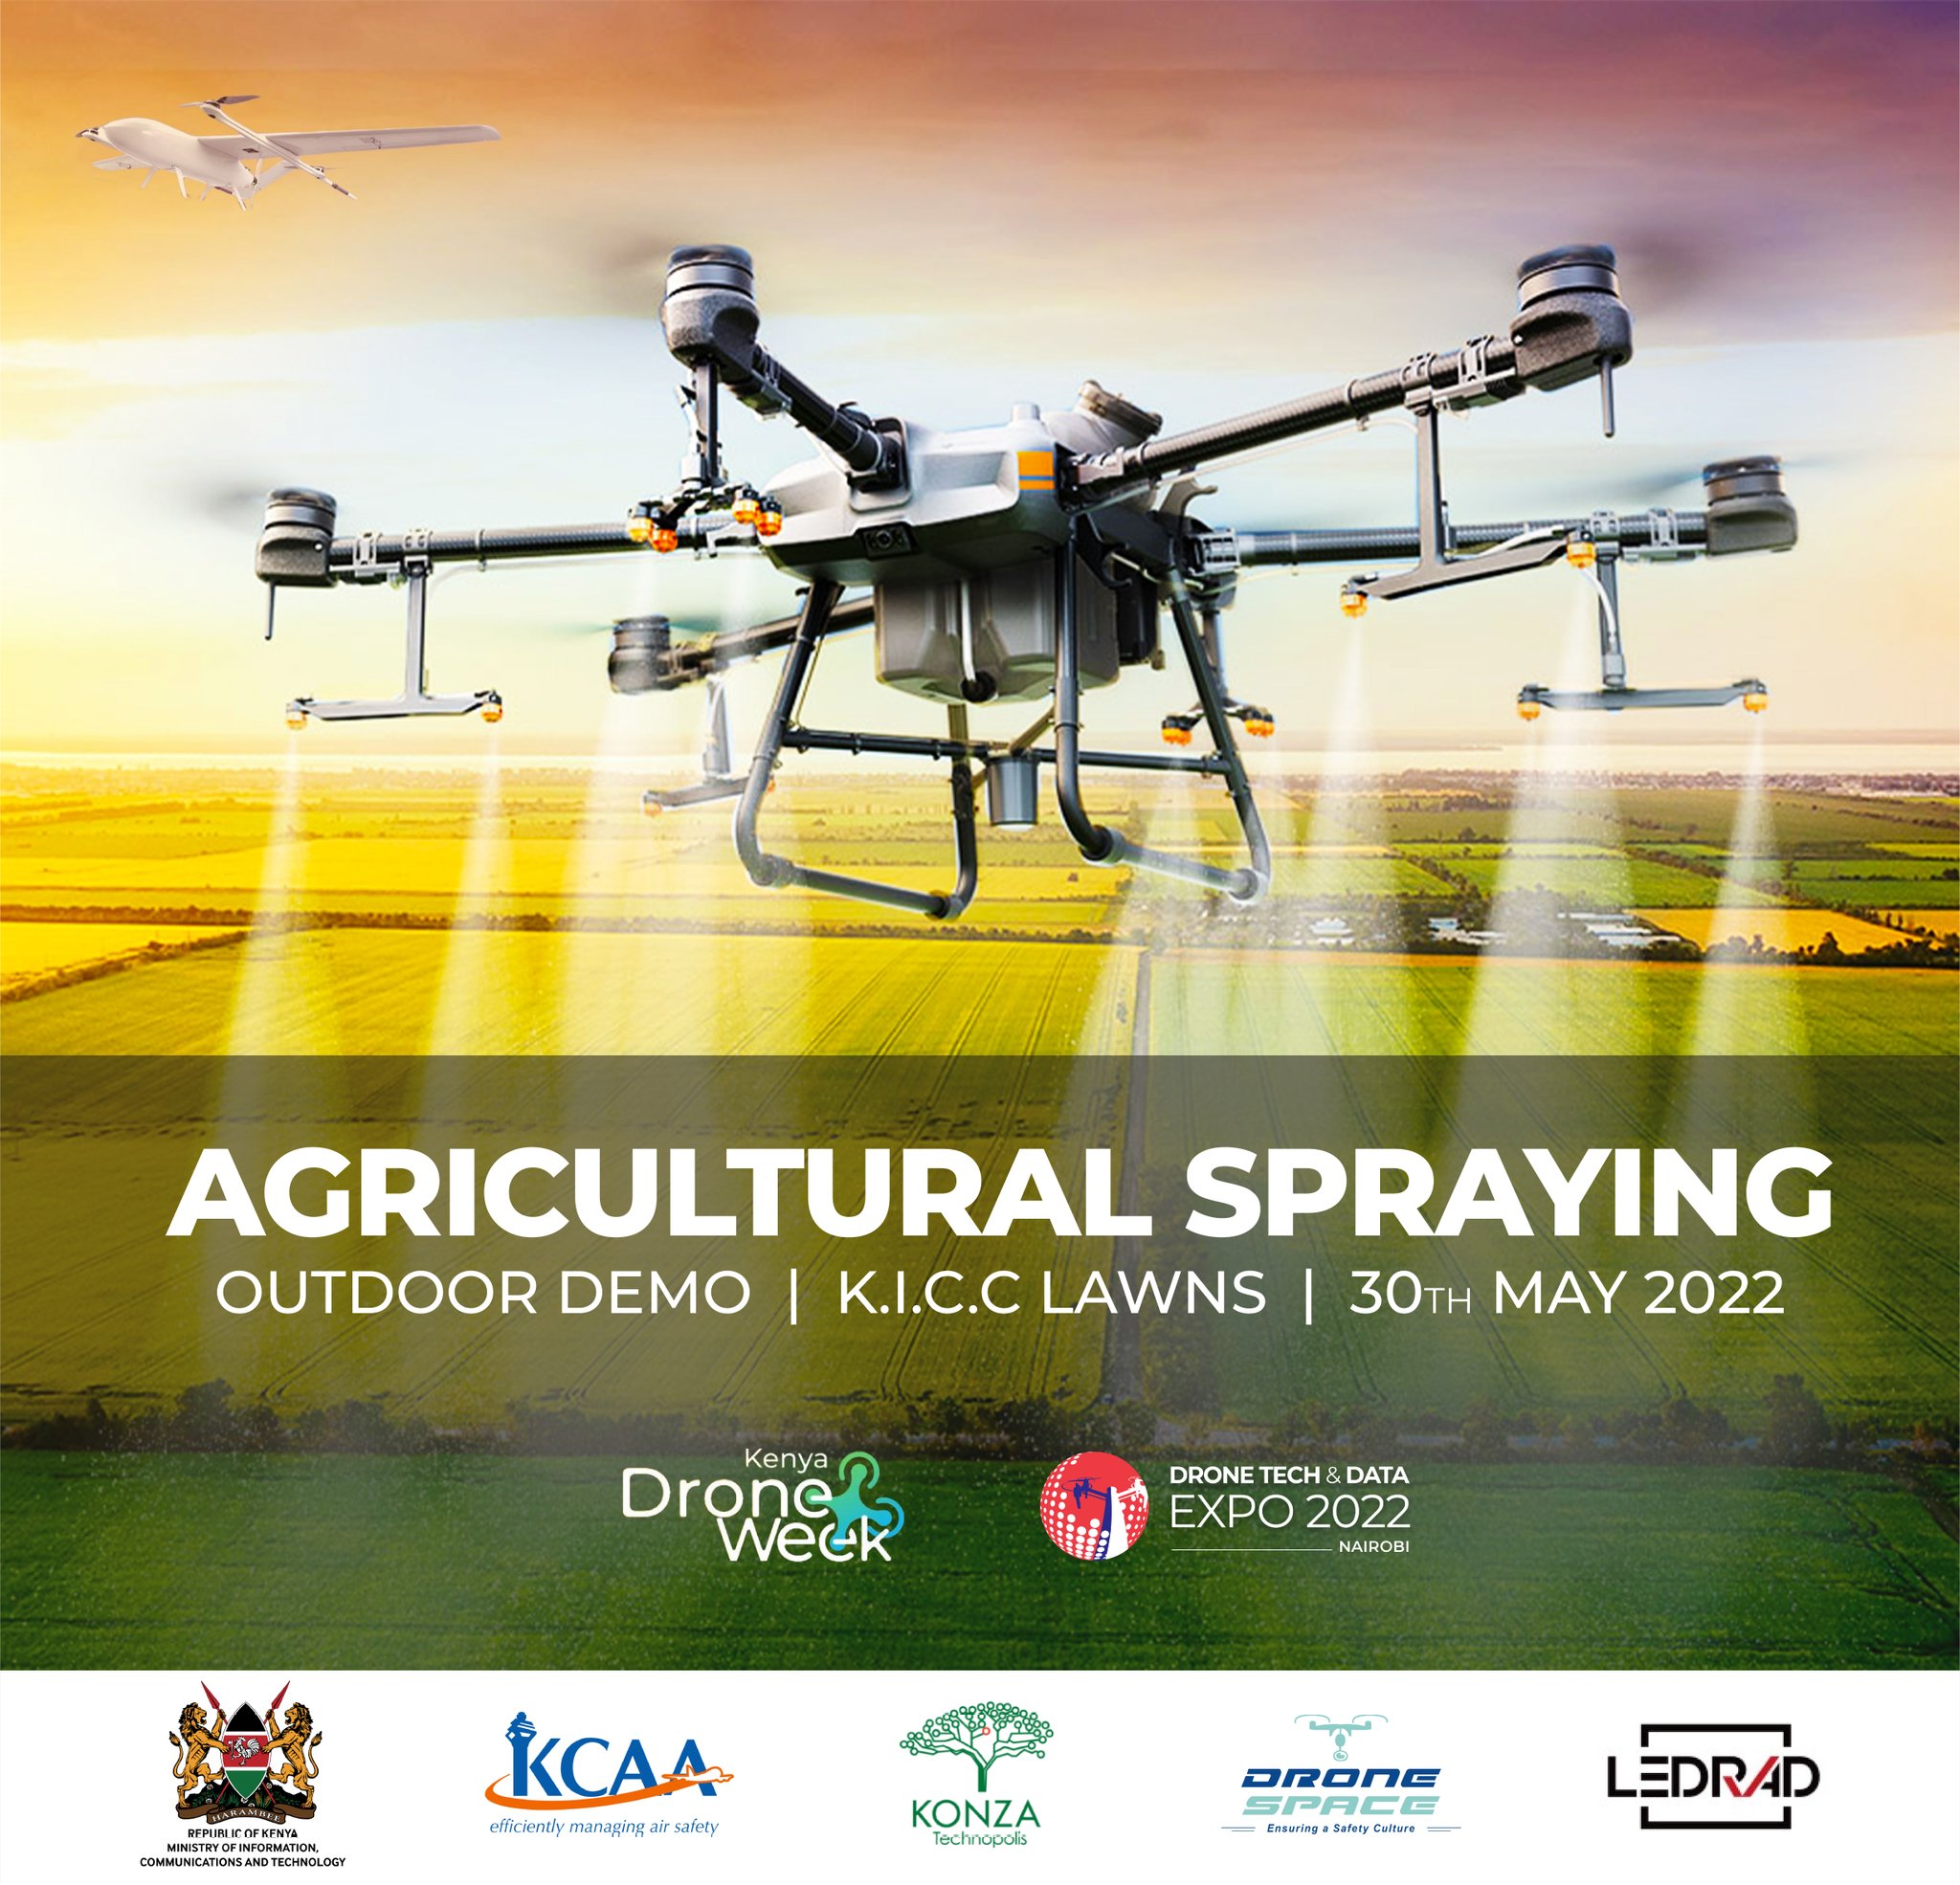 Inapropiado dorado Cósmico Kenya Drone Expo & Conference on Twitter: "Agricultural drones are helping  farmers increase overall efficiency while significantly cutting down  operational costs. Come and experience agricultural drones in action on the  sidelines of